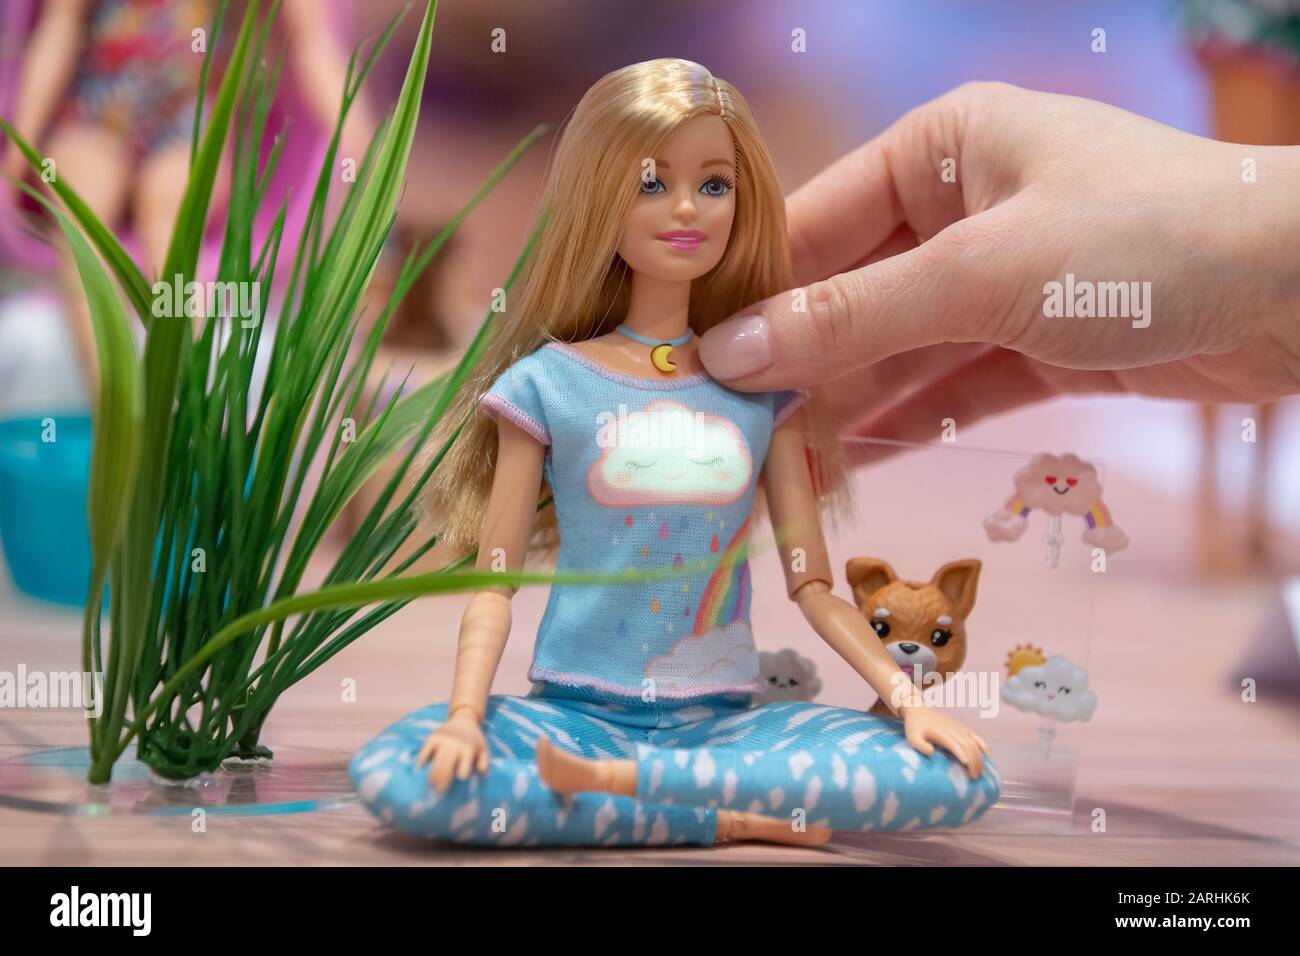 Nuremberg, Germany. 28th Jan, 2020. A and meditation doll from the U.S. toy manufacturer Mattel on display at the company's stand at the International Toy Fair . Mattel intends